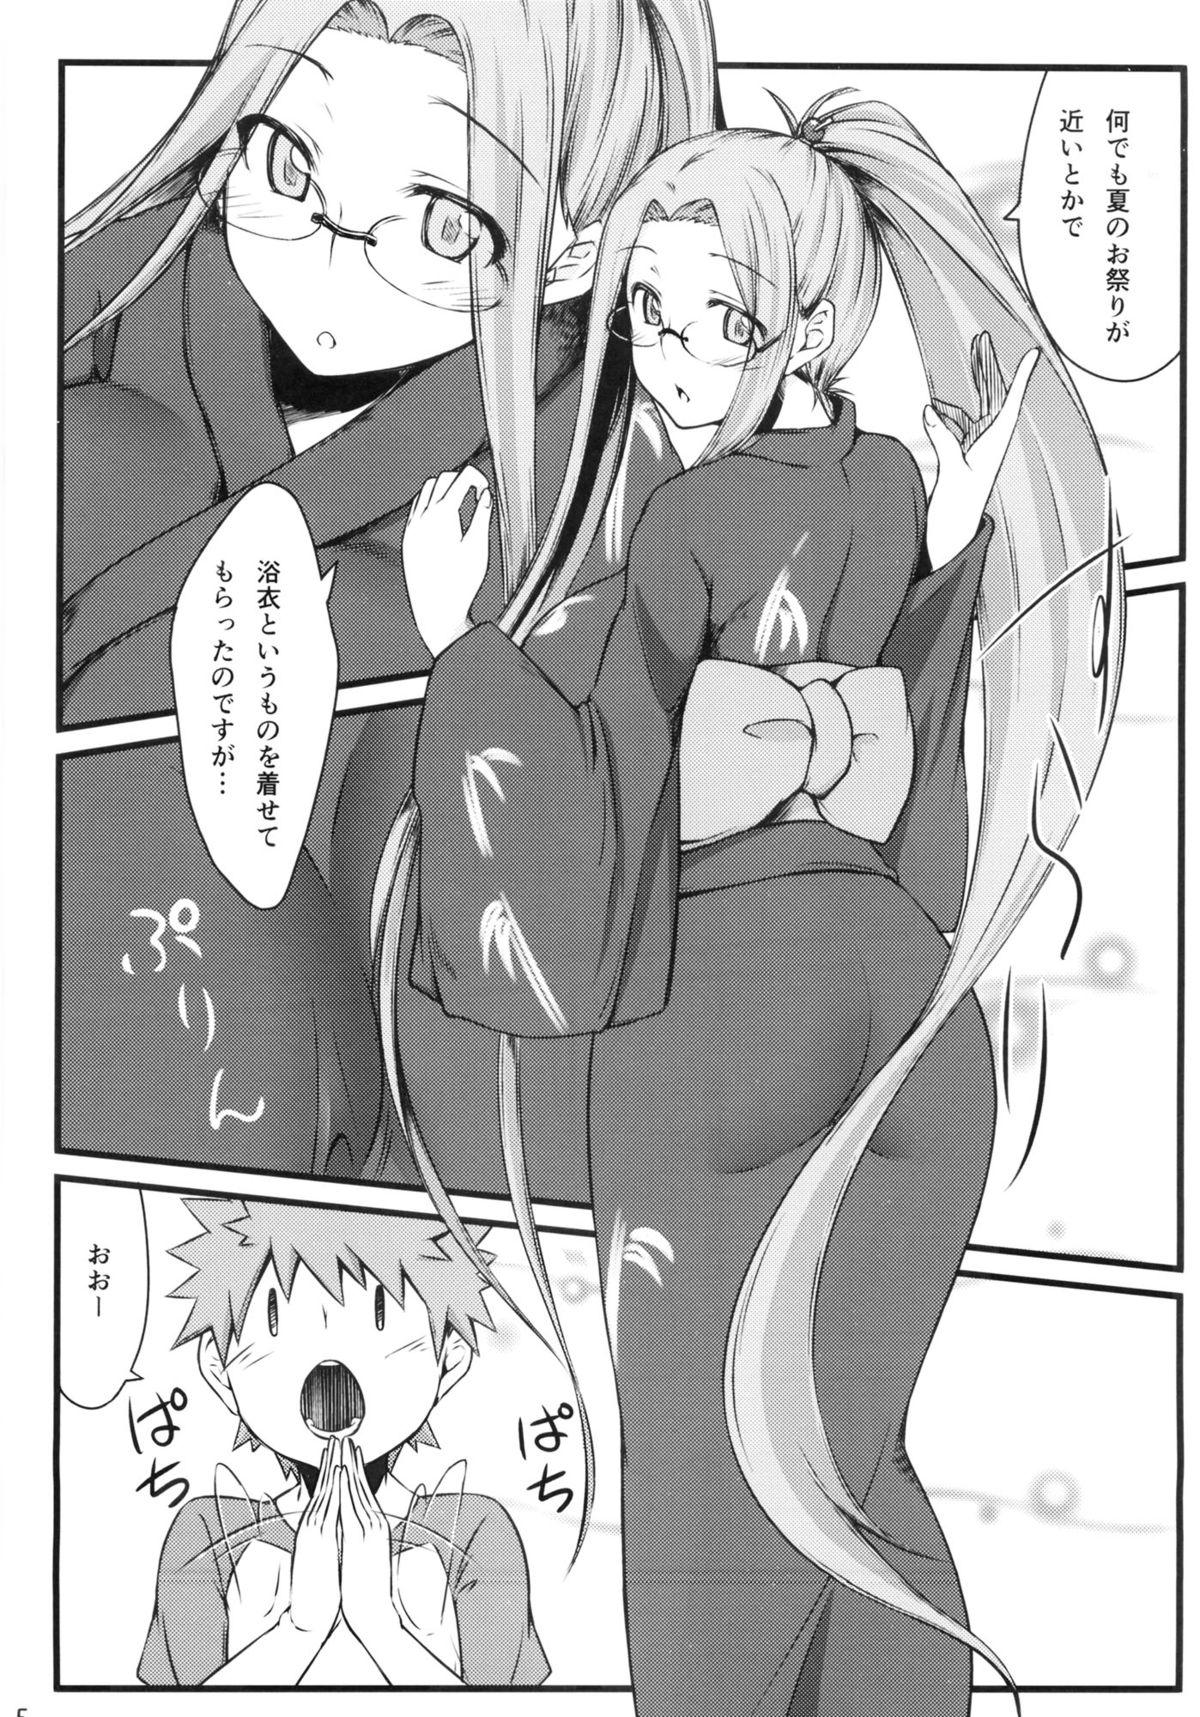 Old And Young R8 - Fate hollow ataraxia Atm - Page 4